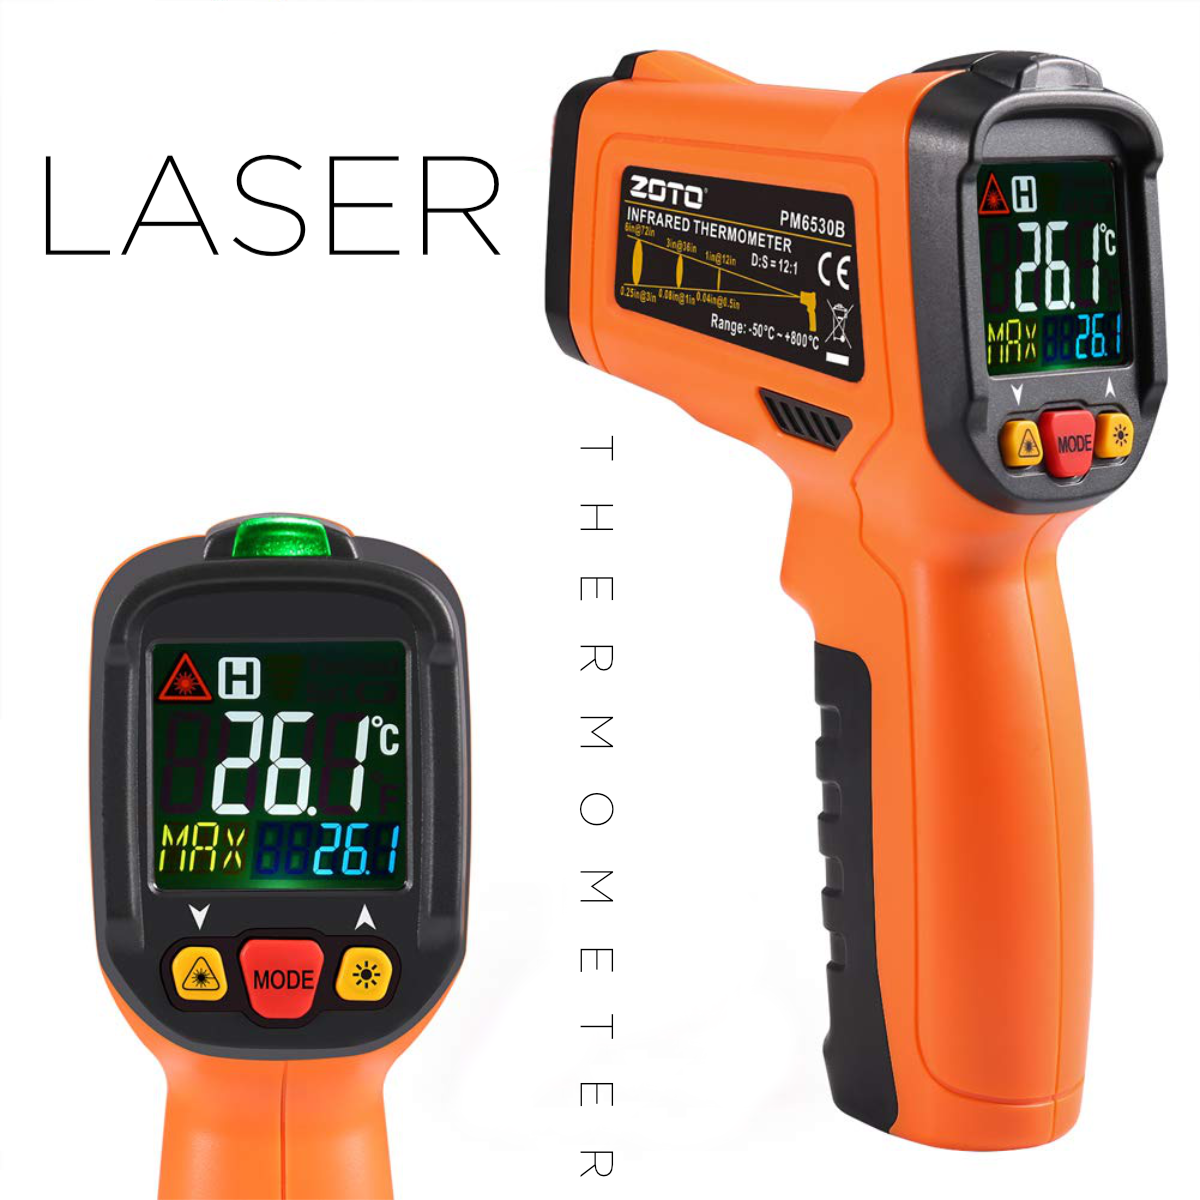 https://thejazzchef.com/wp-content/uploads/2021/03/laser-thermometer.png